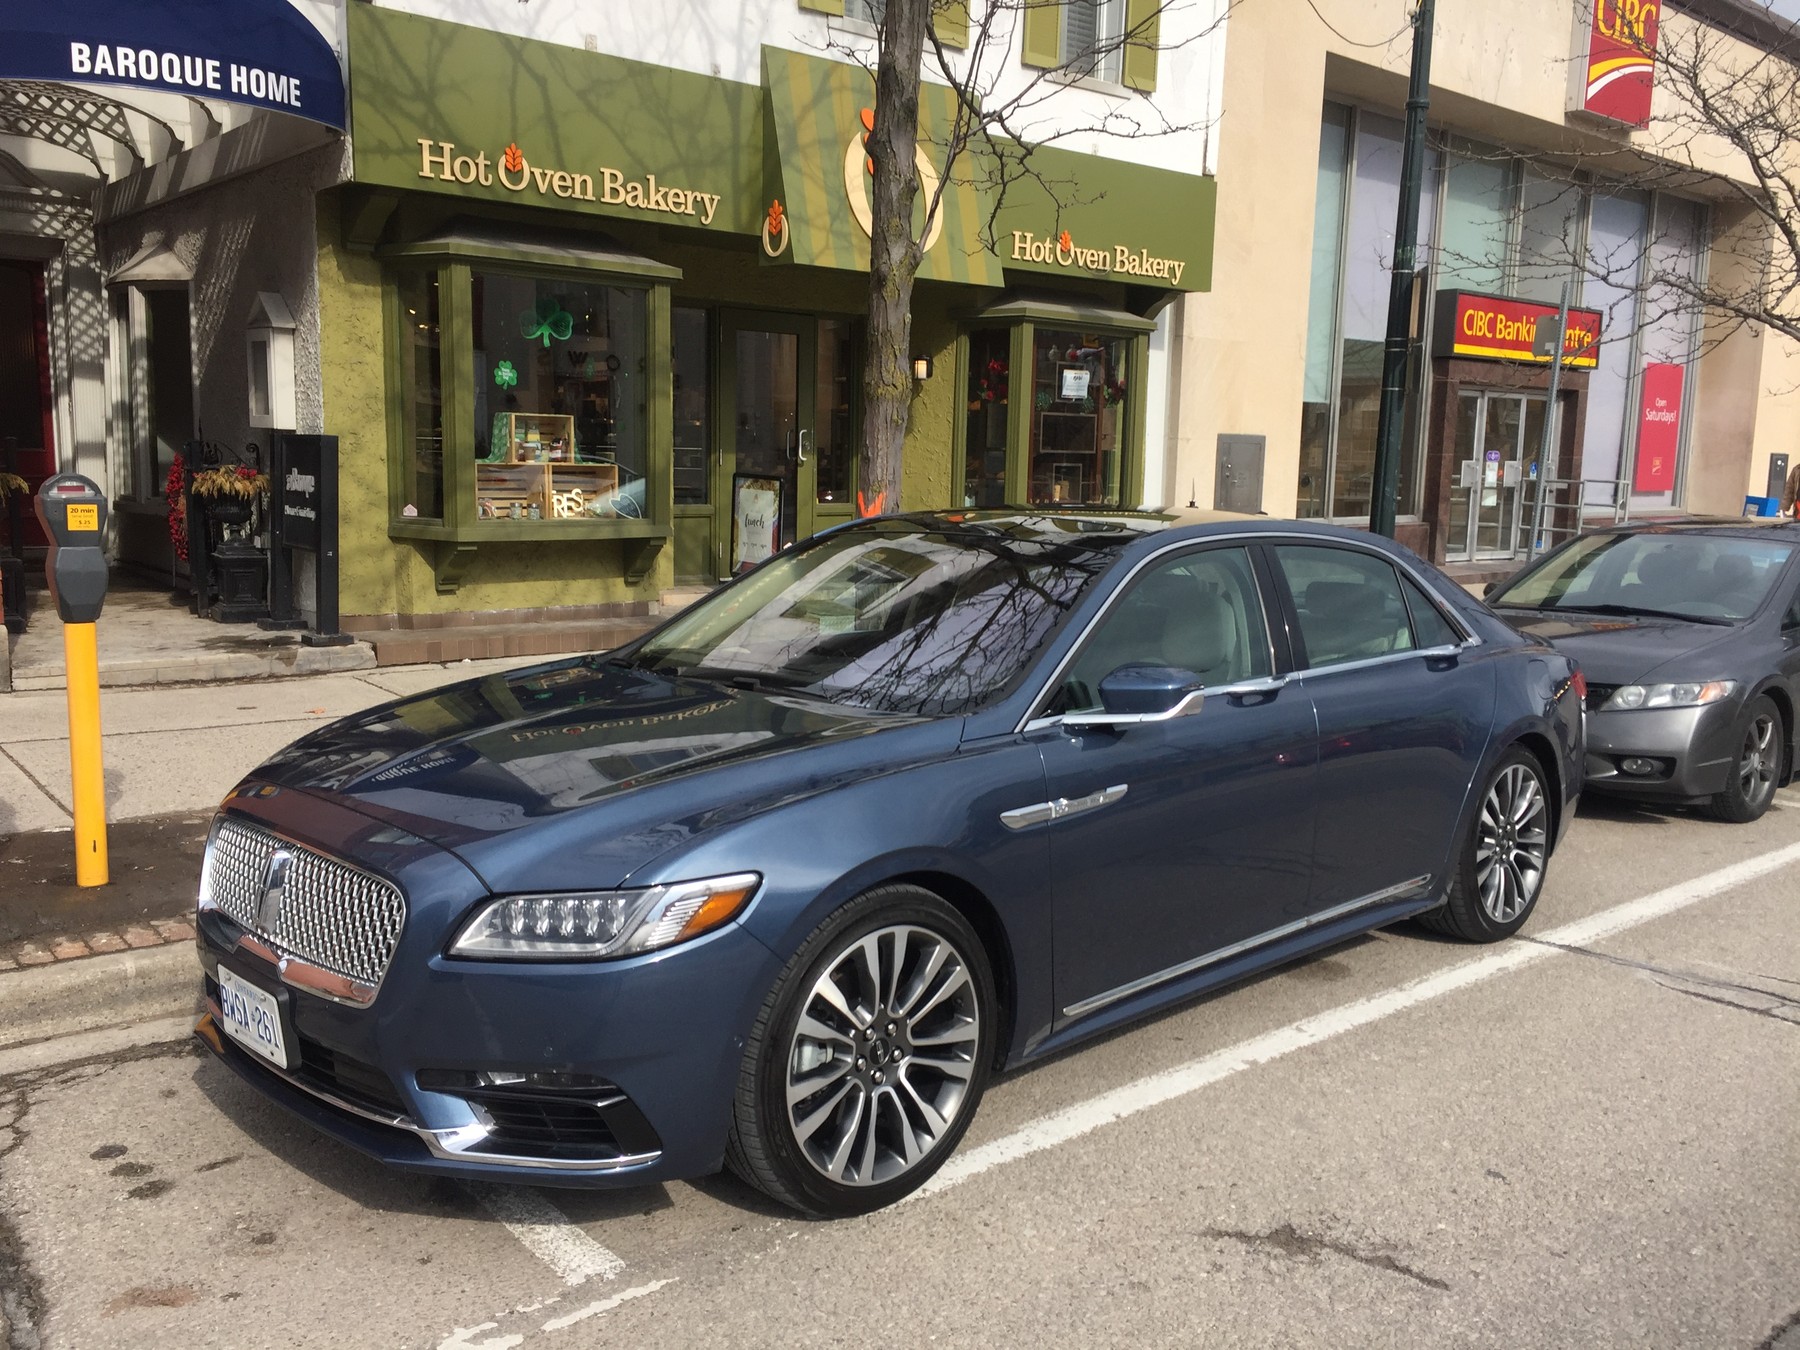 2019 Lincoln Continental | R.G. Beltzner